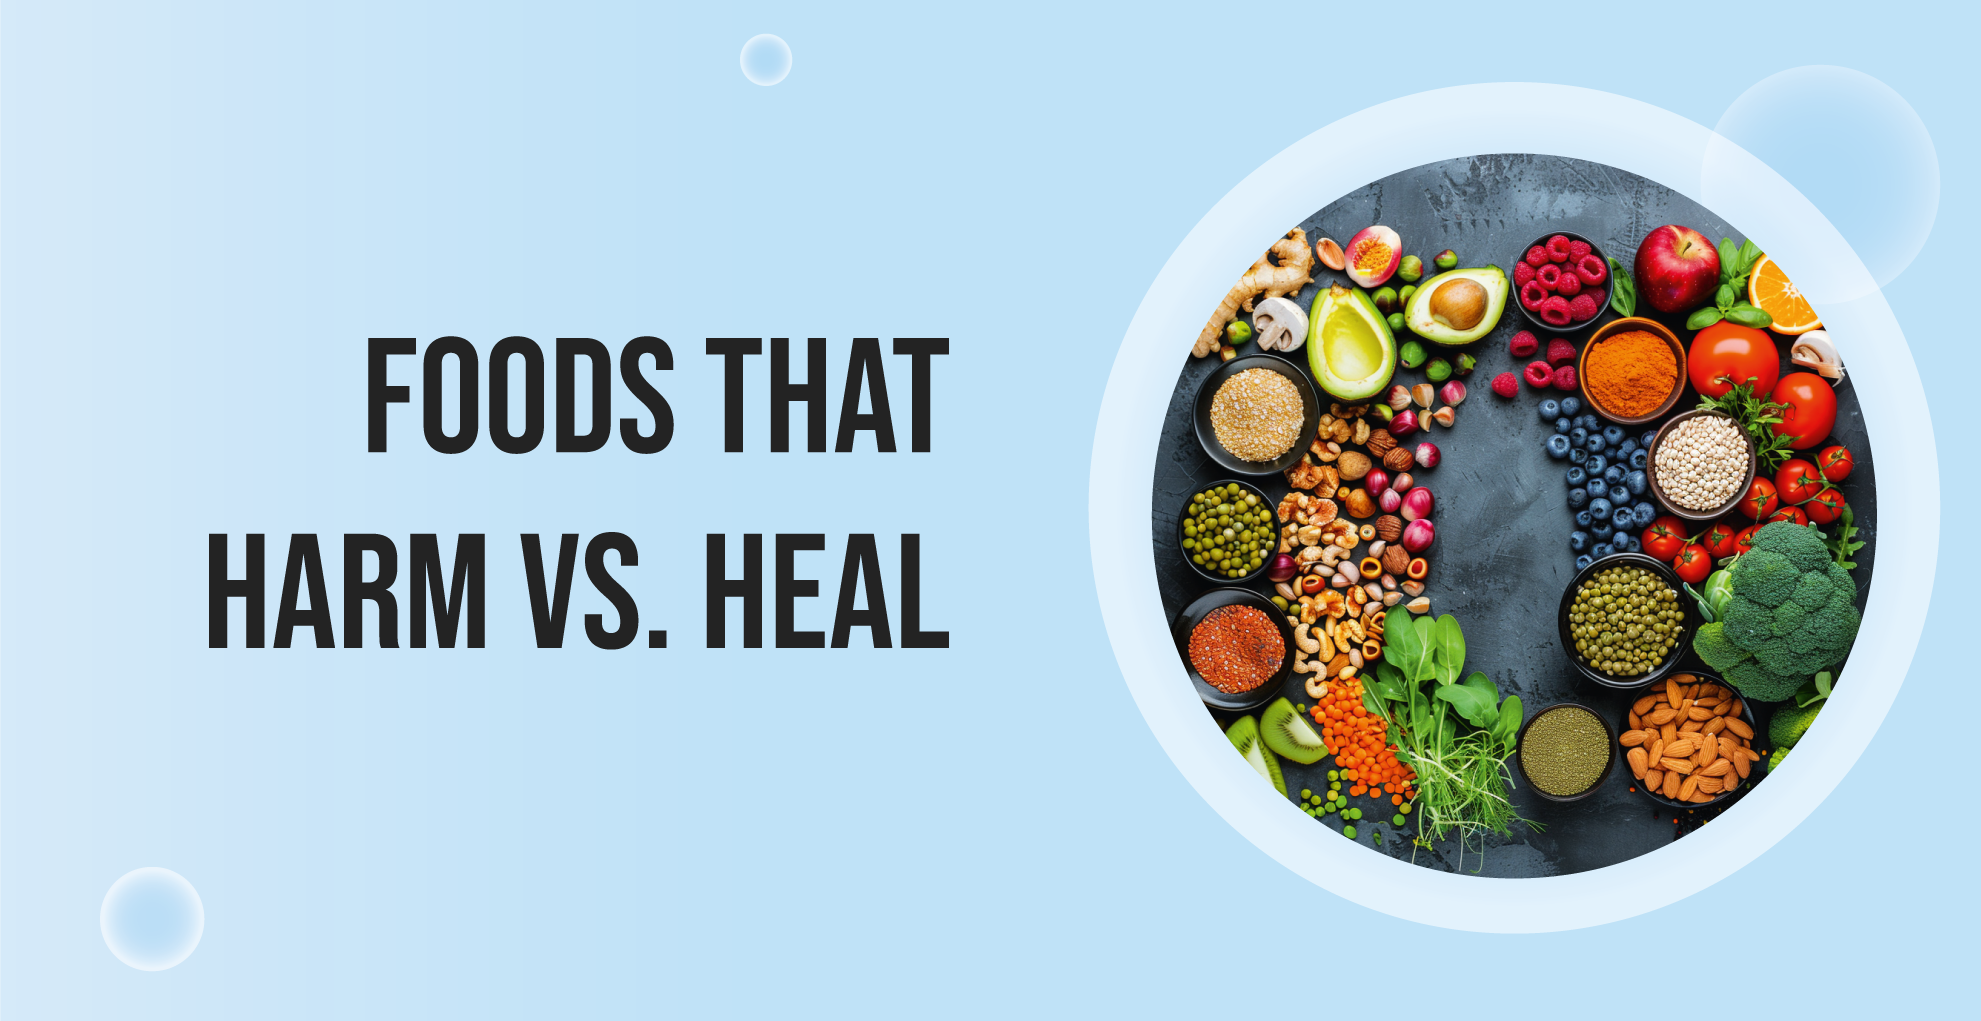 Comparison of harmful vs. healing foods for gut health